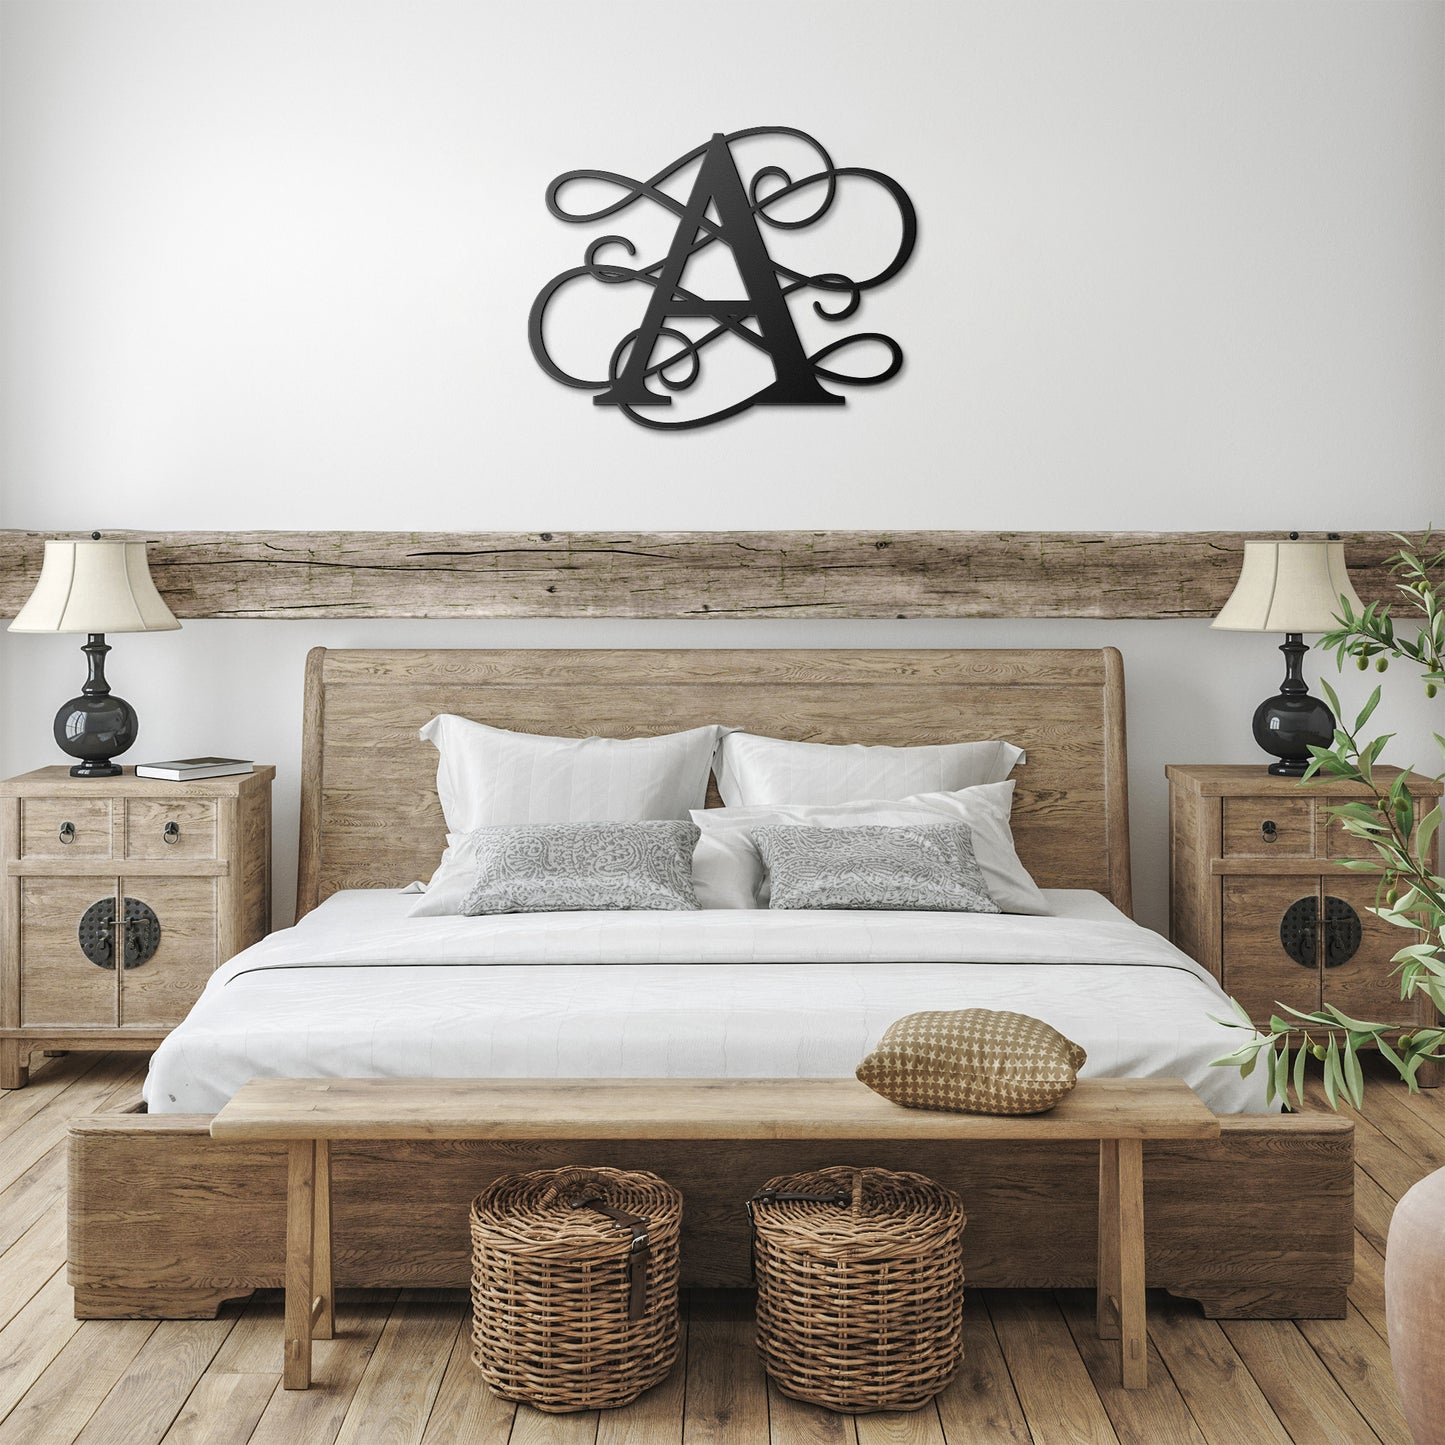 Letter A, Your Initial, Swirl Letters, Monogram, Metal Signs, Rustic Sign, Wall Art, Wall Decor